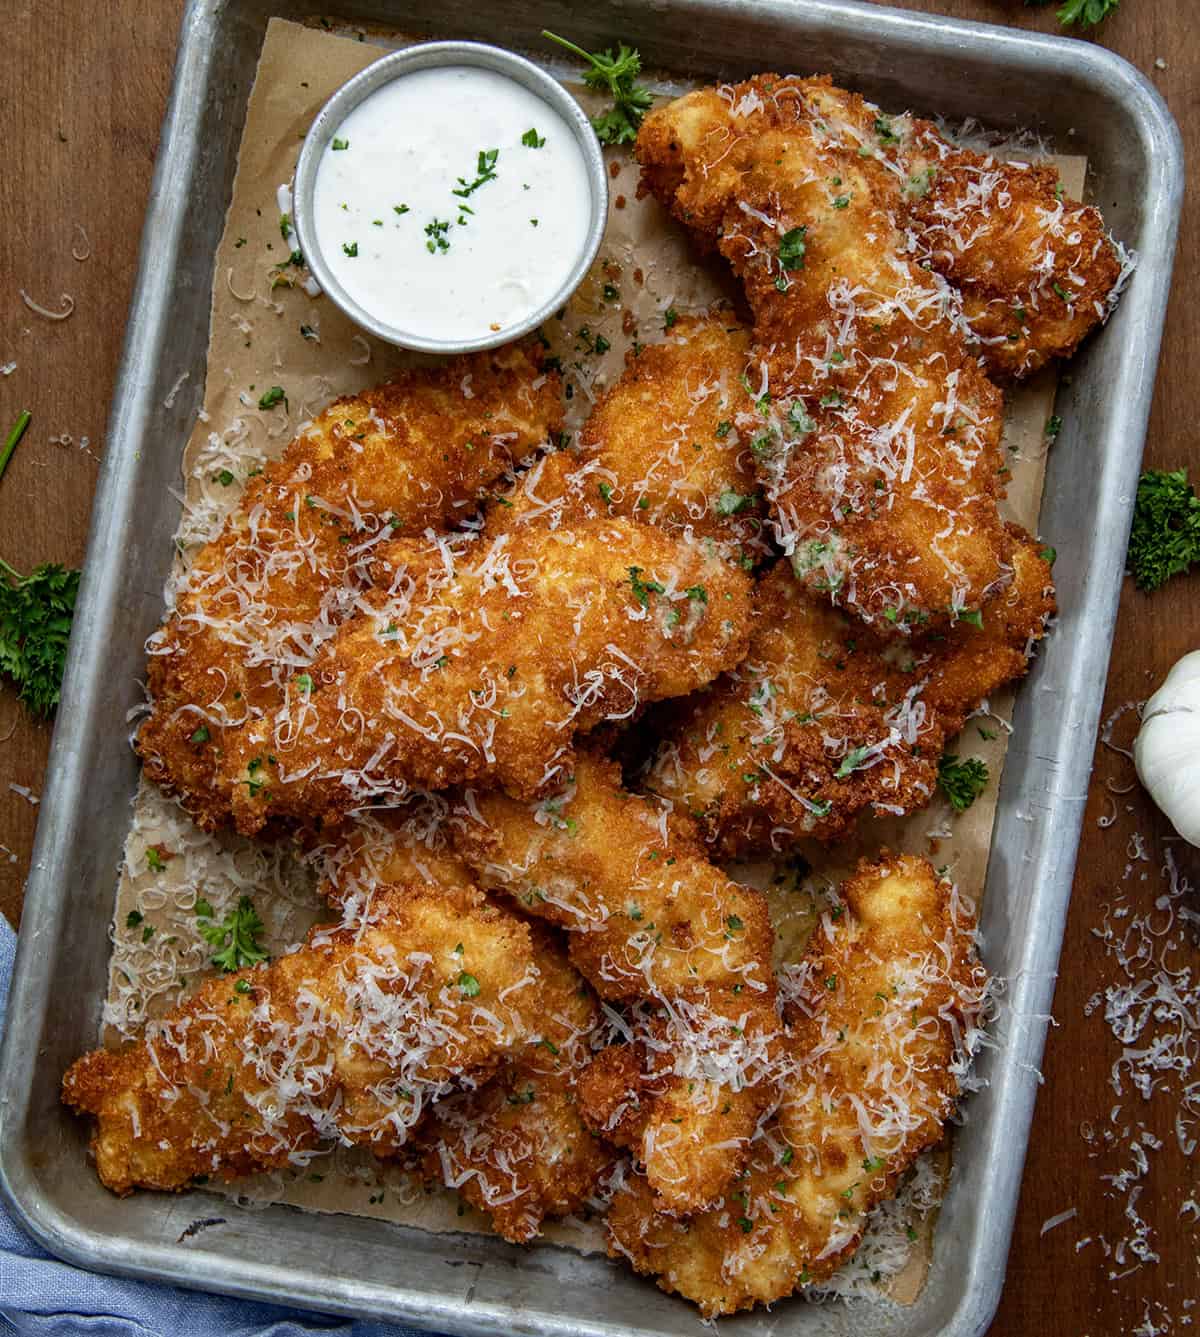 Pan of Garlic Parmesan Chicken Tenders on a wooden table with some ranch dressing from overhead.